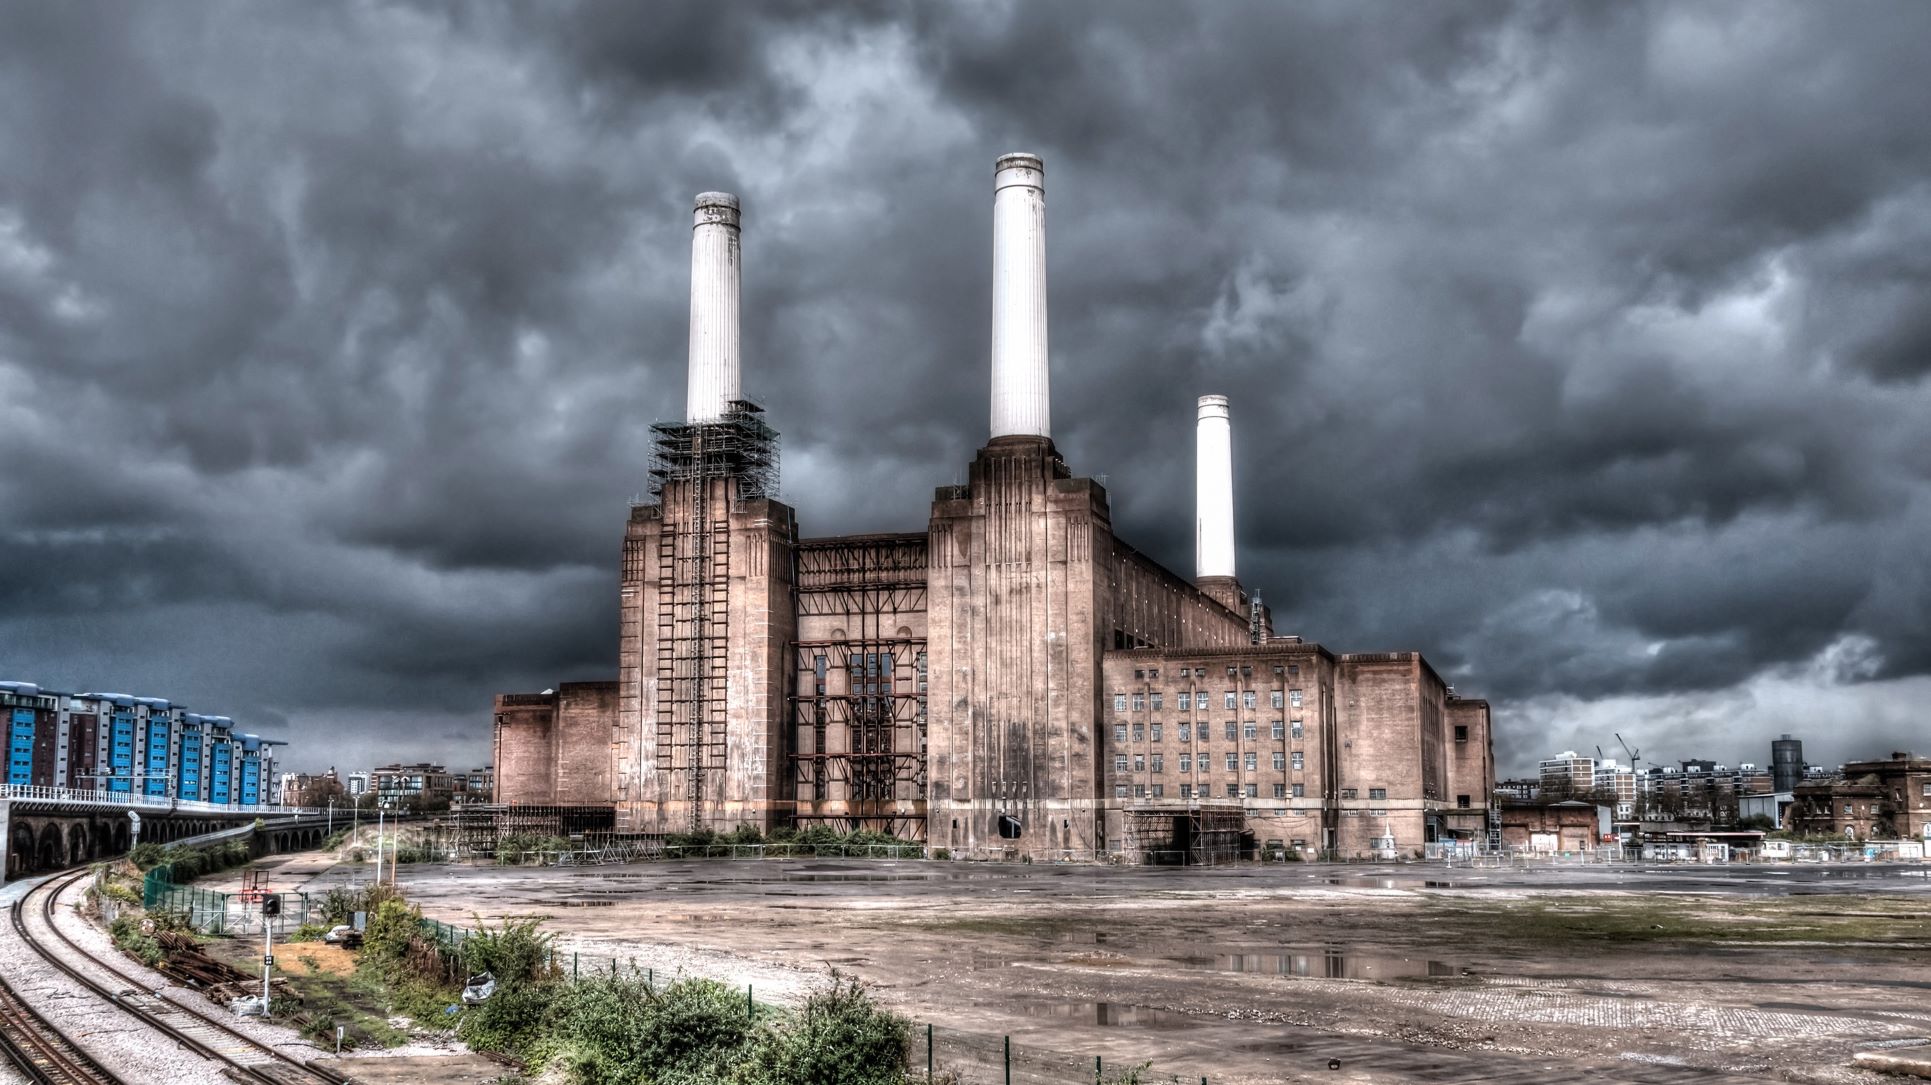 The history of Battersea Power Station